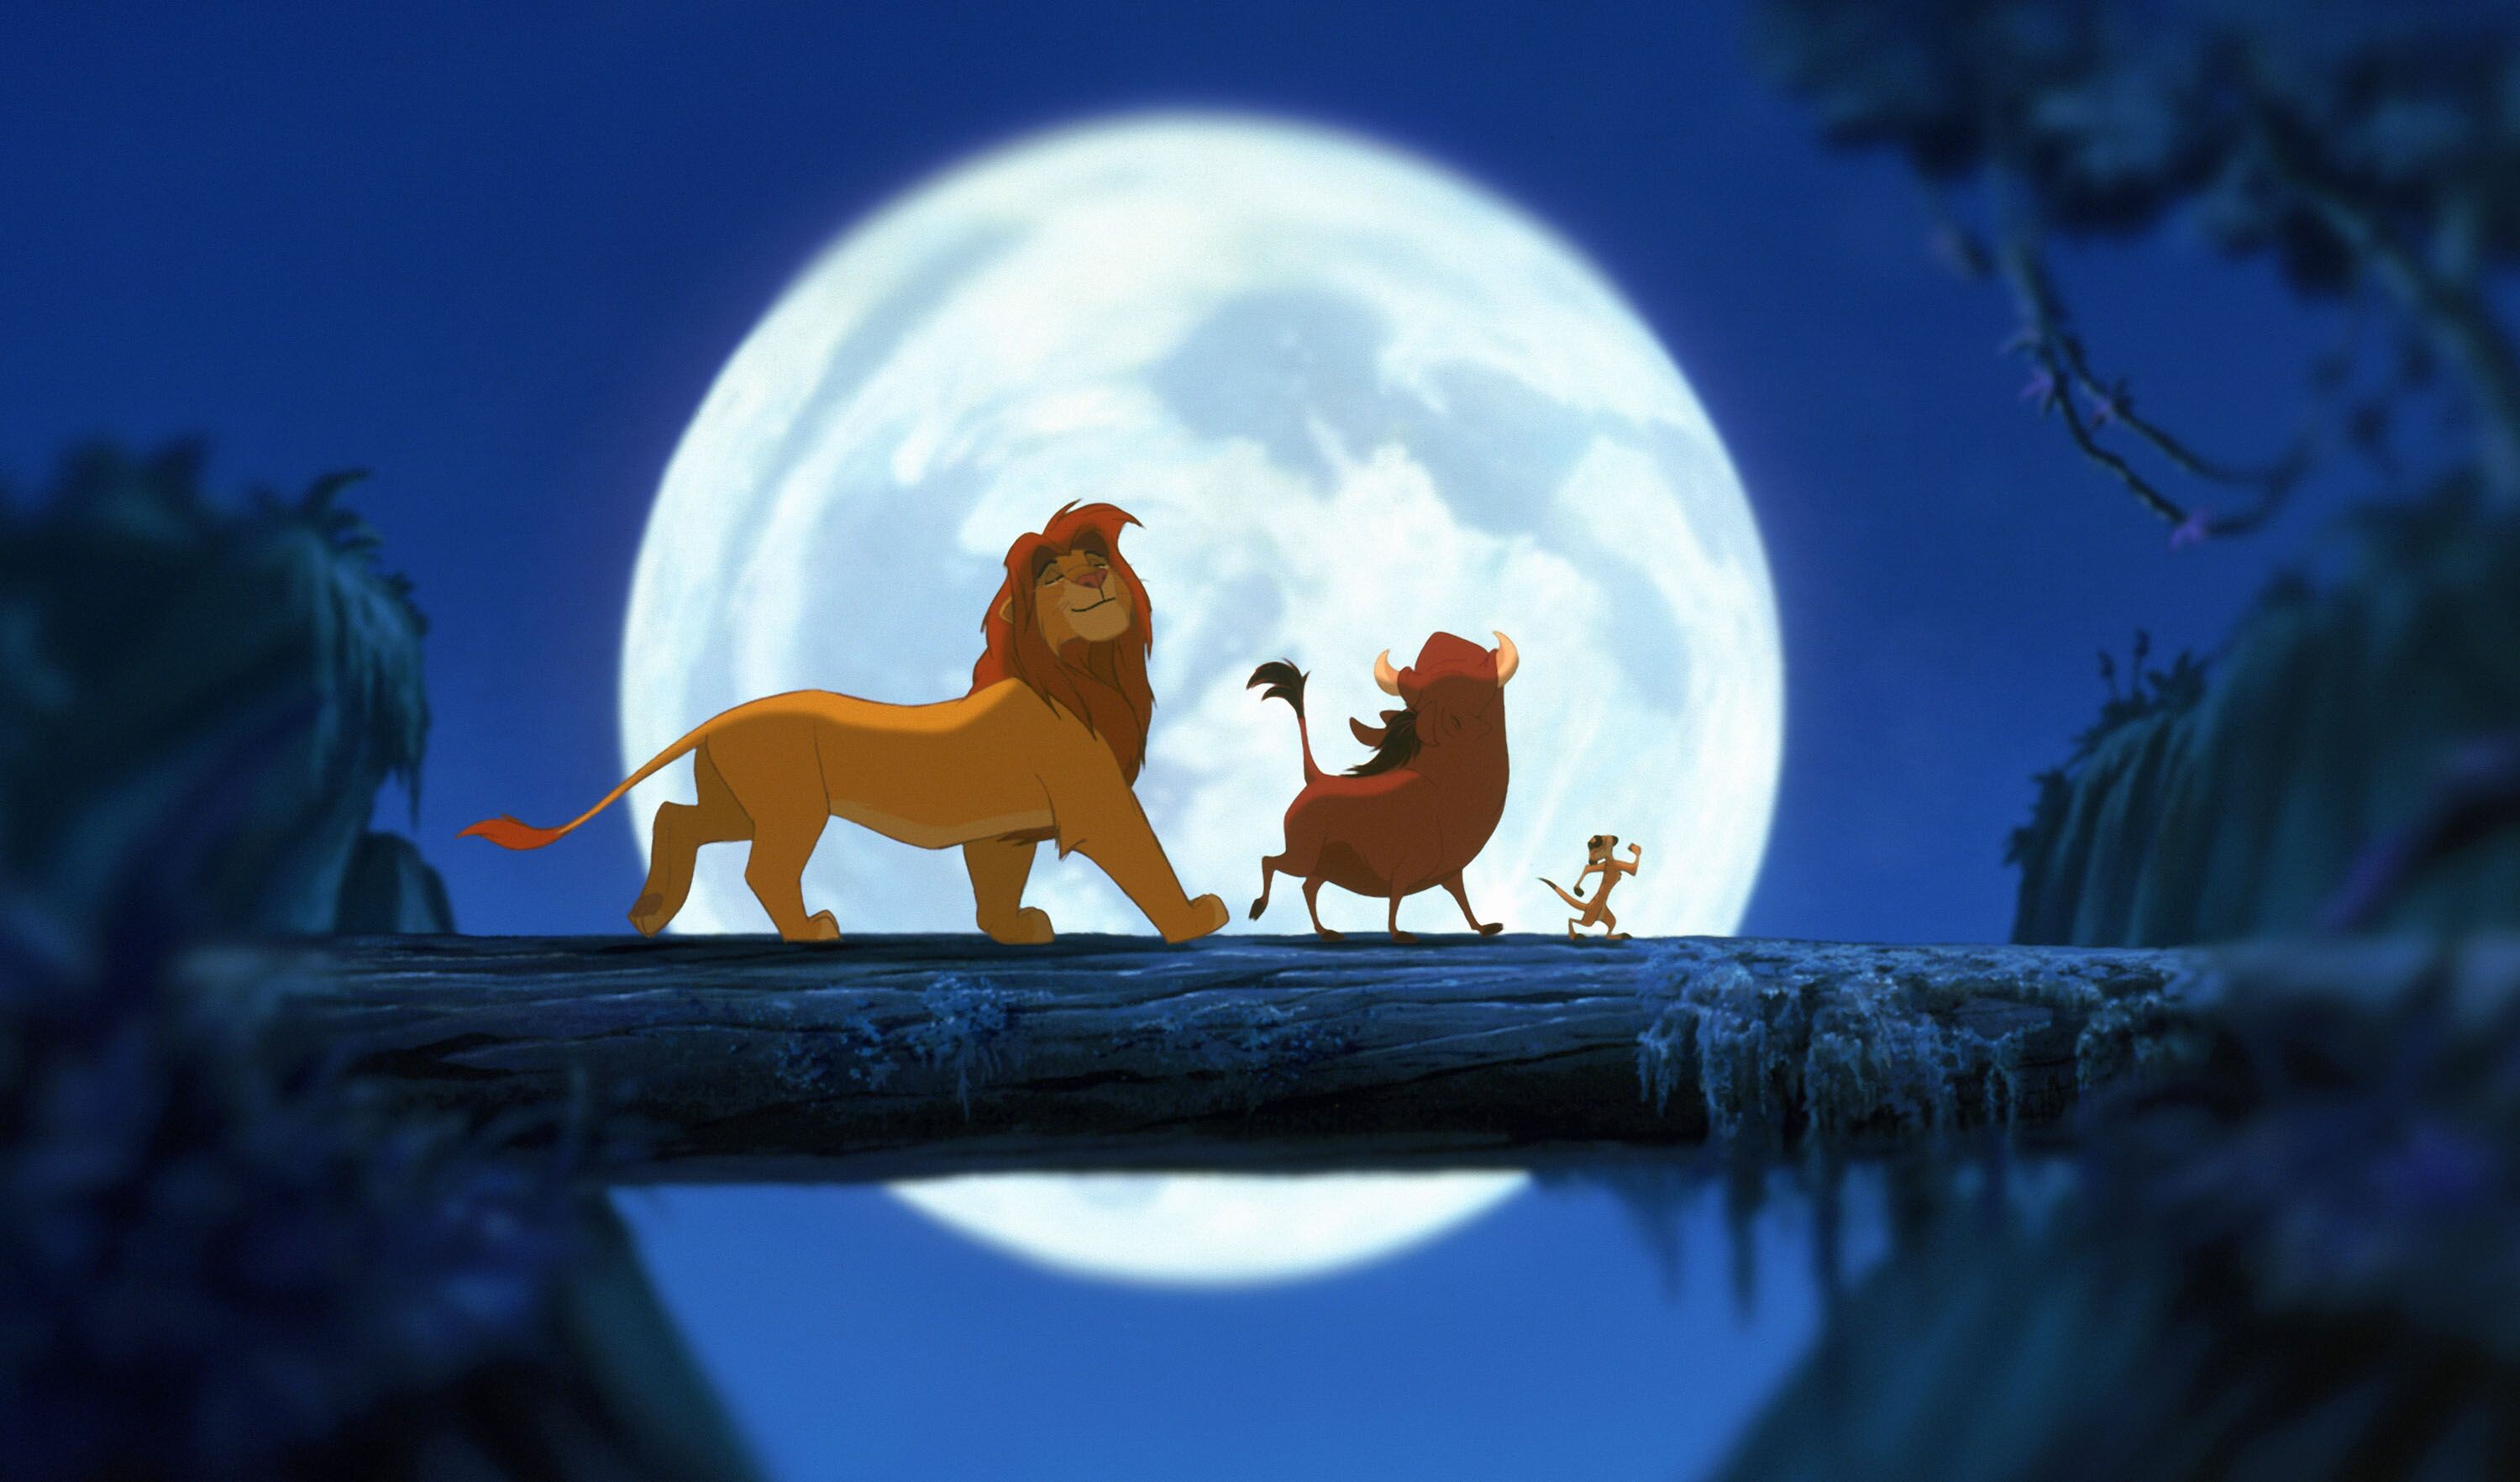 The Lion King, Awesome wallpapers, Lion King backgrounds, 3000x1770 HD Desktop